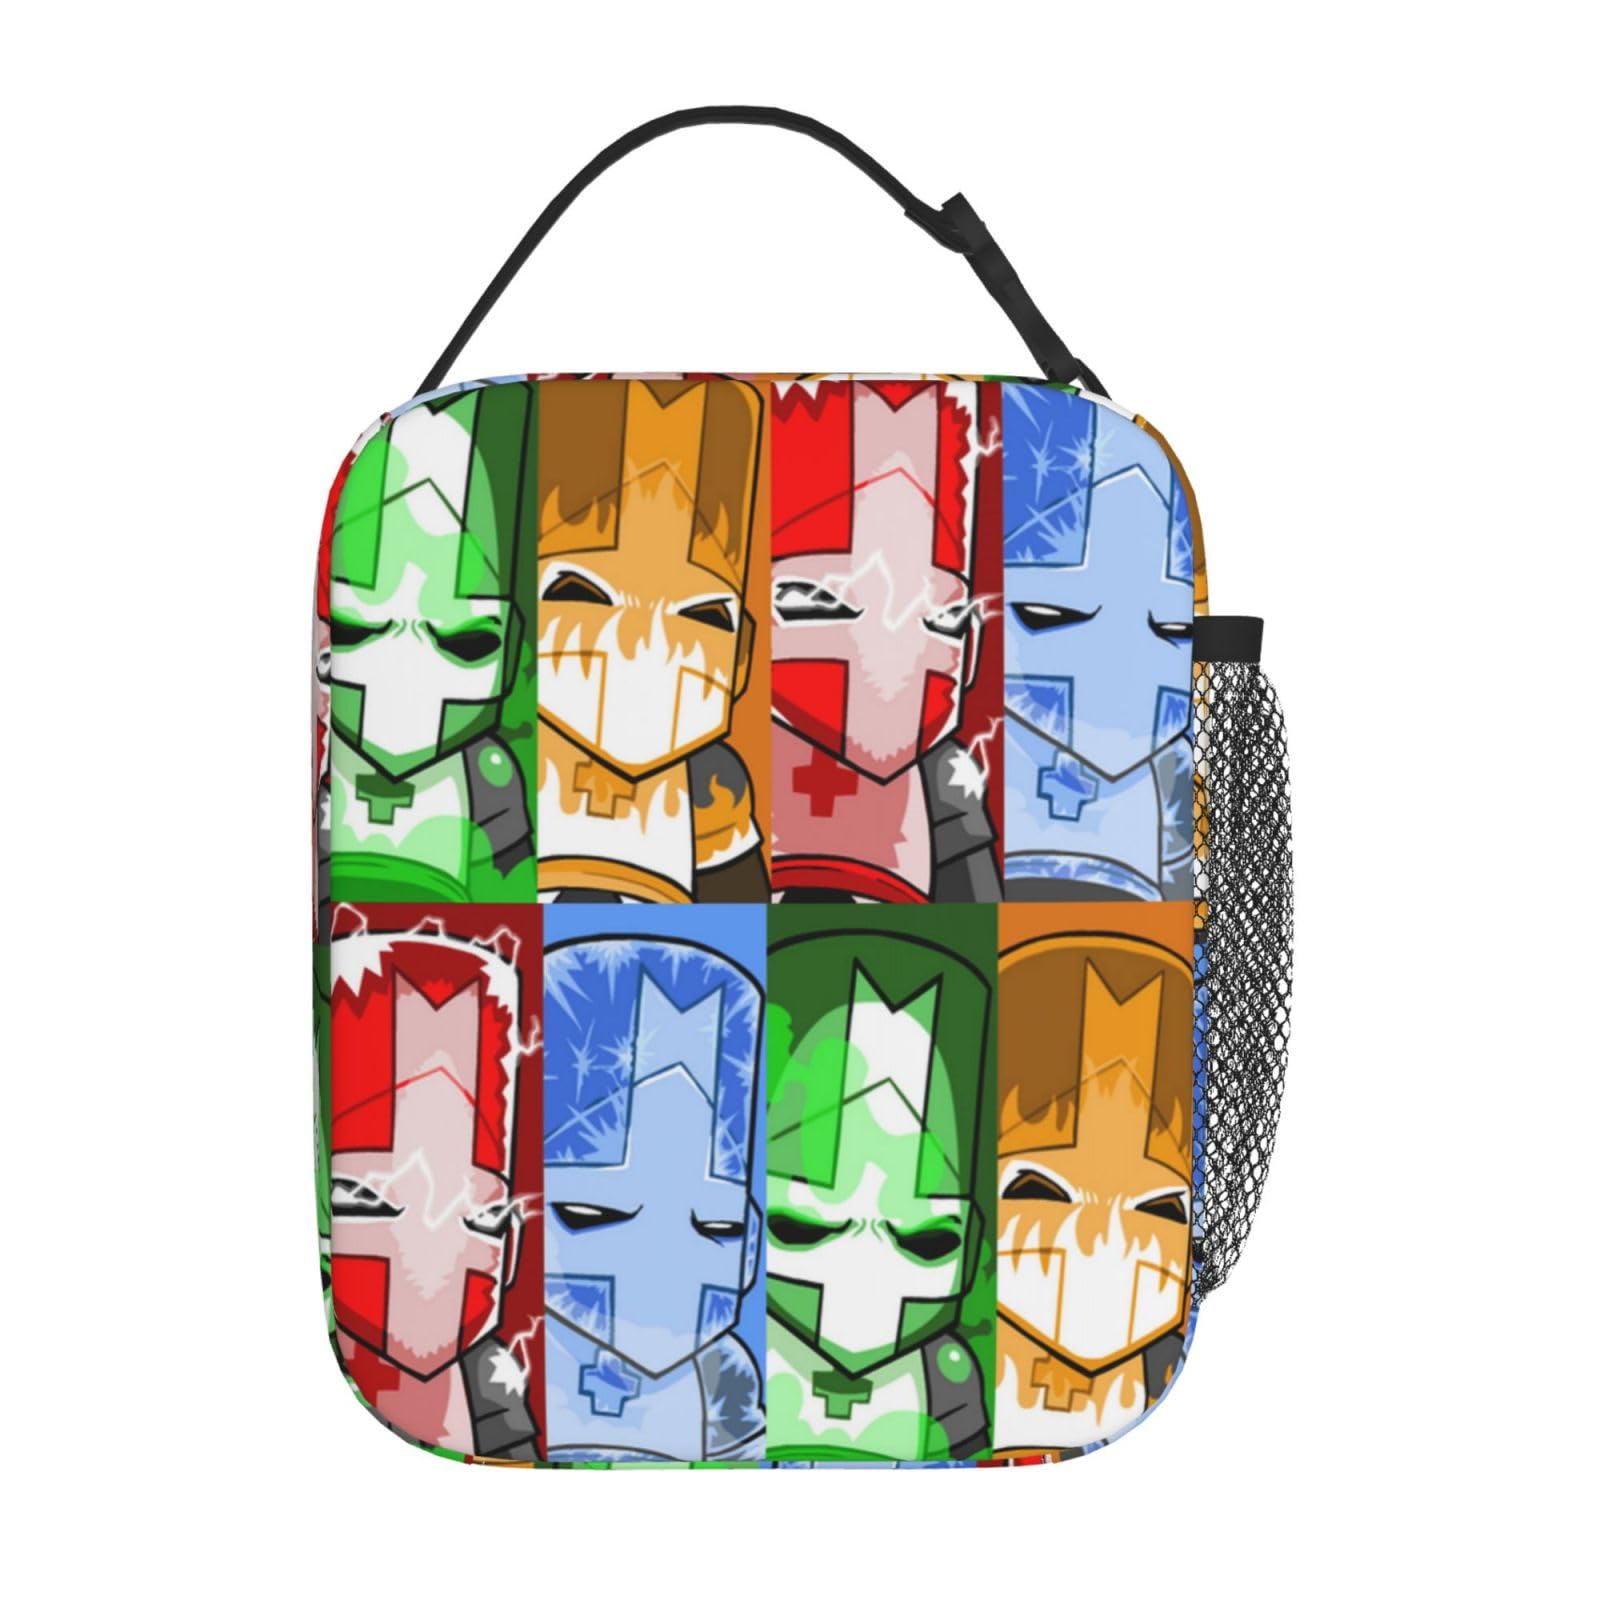 DSERC Castle Cartoon Crashers Anime Lunch Bags Insulated Lunch Tote Reusable Lunch Handbag for Work Picnic Travel 10 X 4 X 8 inches